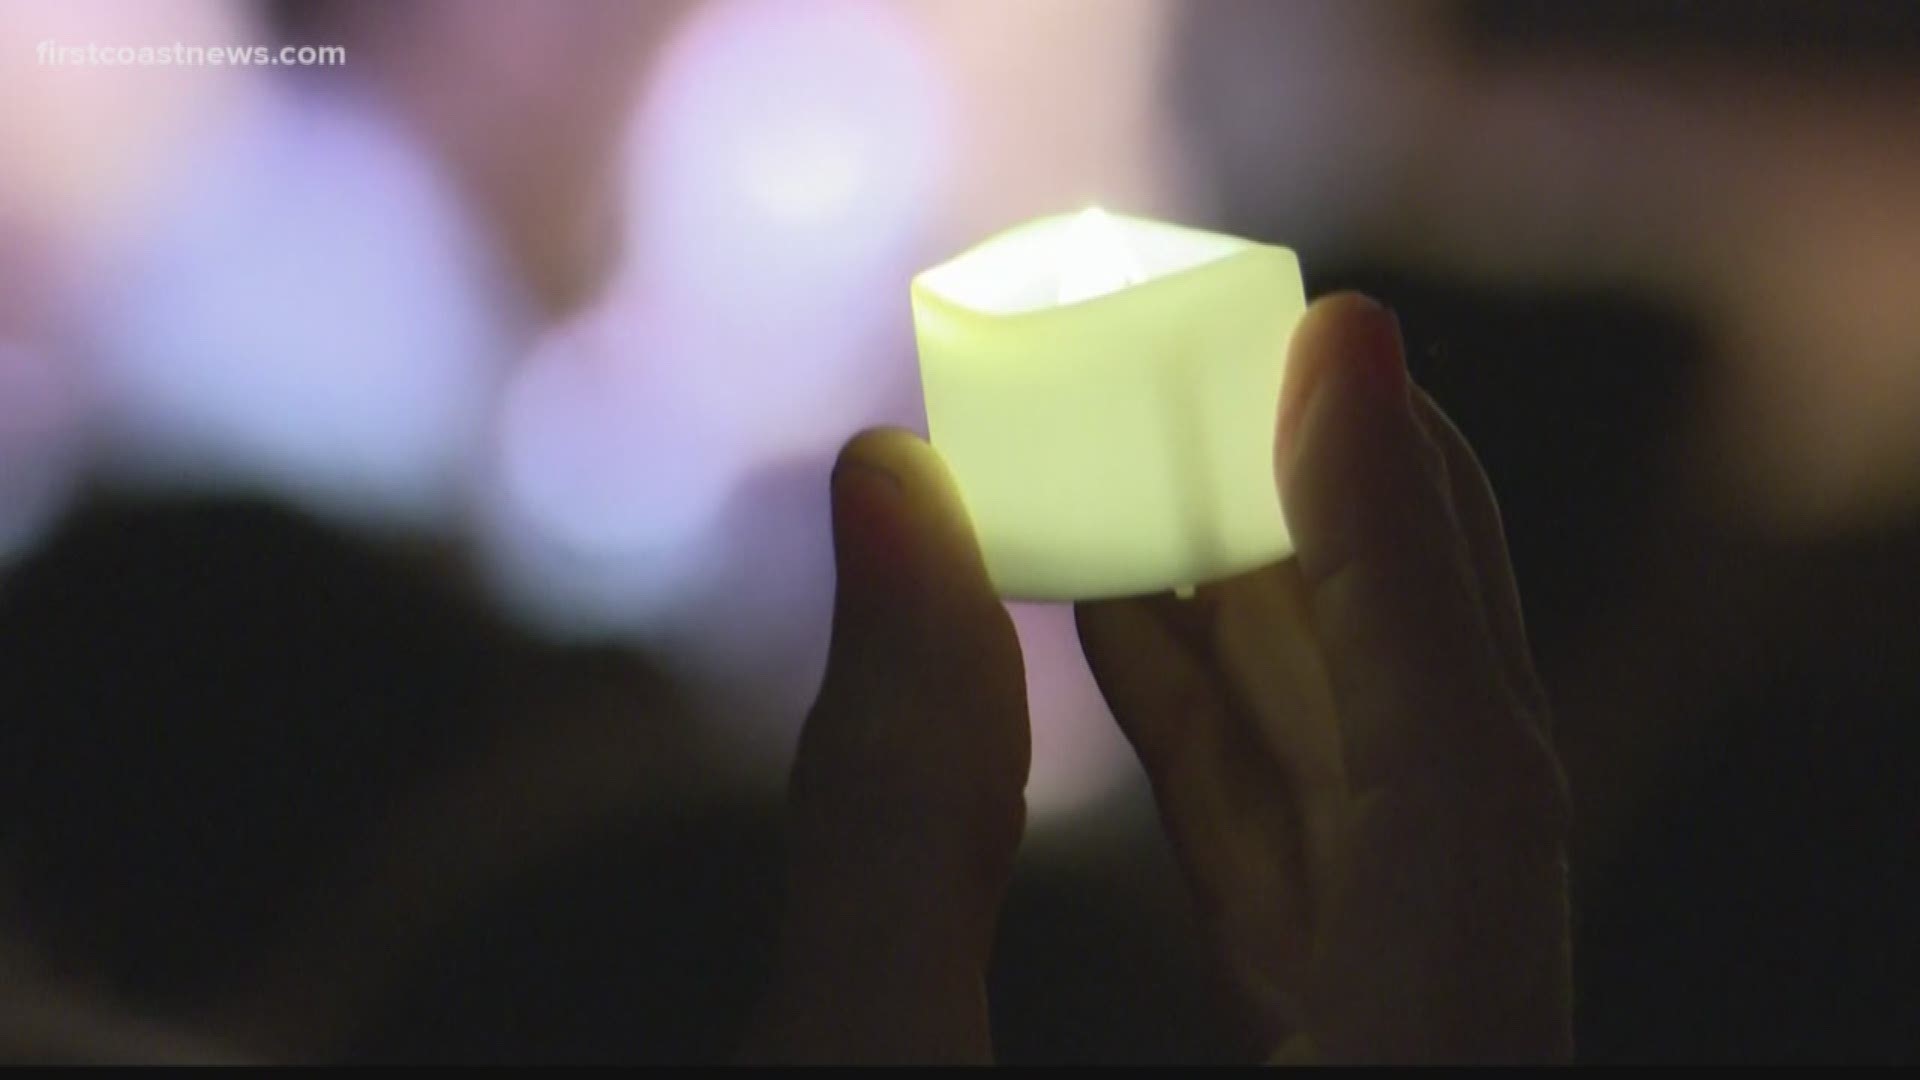 A synagogue held a vigil for those killed in the Pittsburgh synagogue shooting.